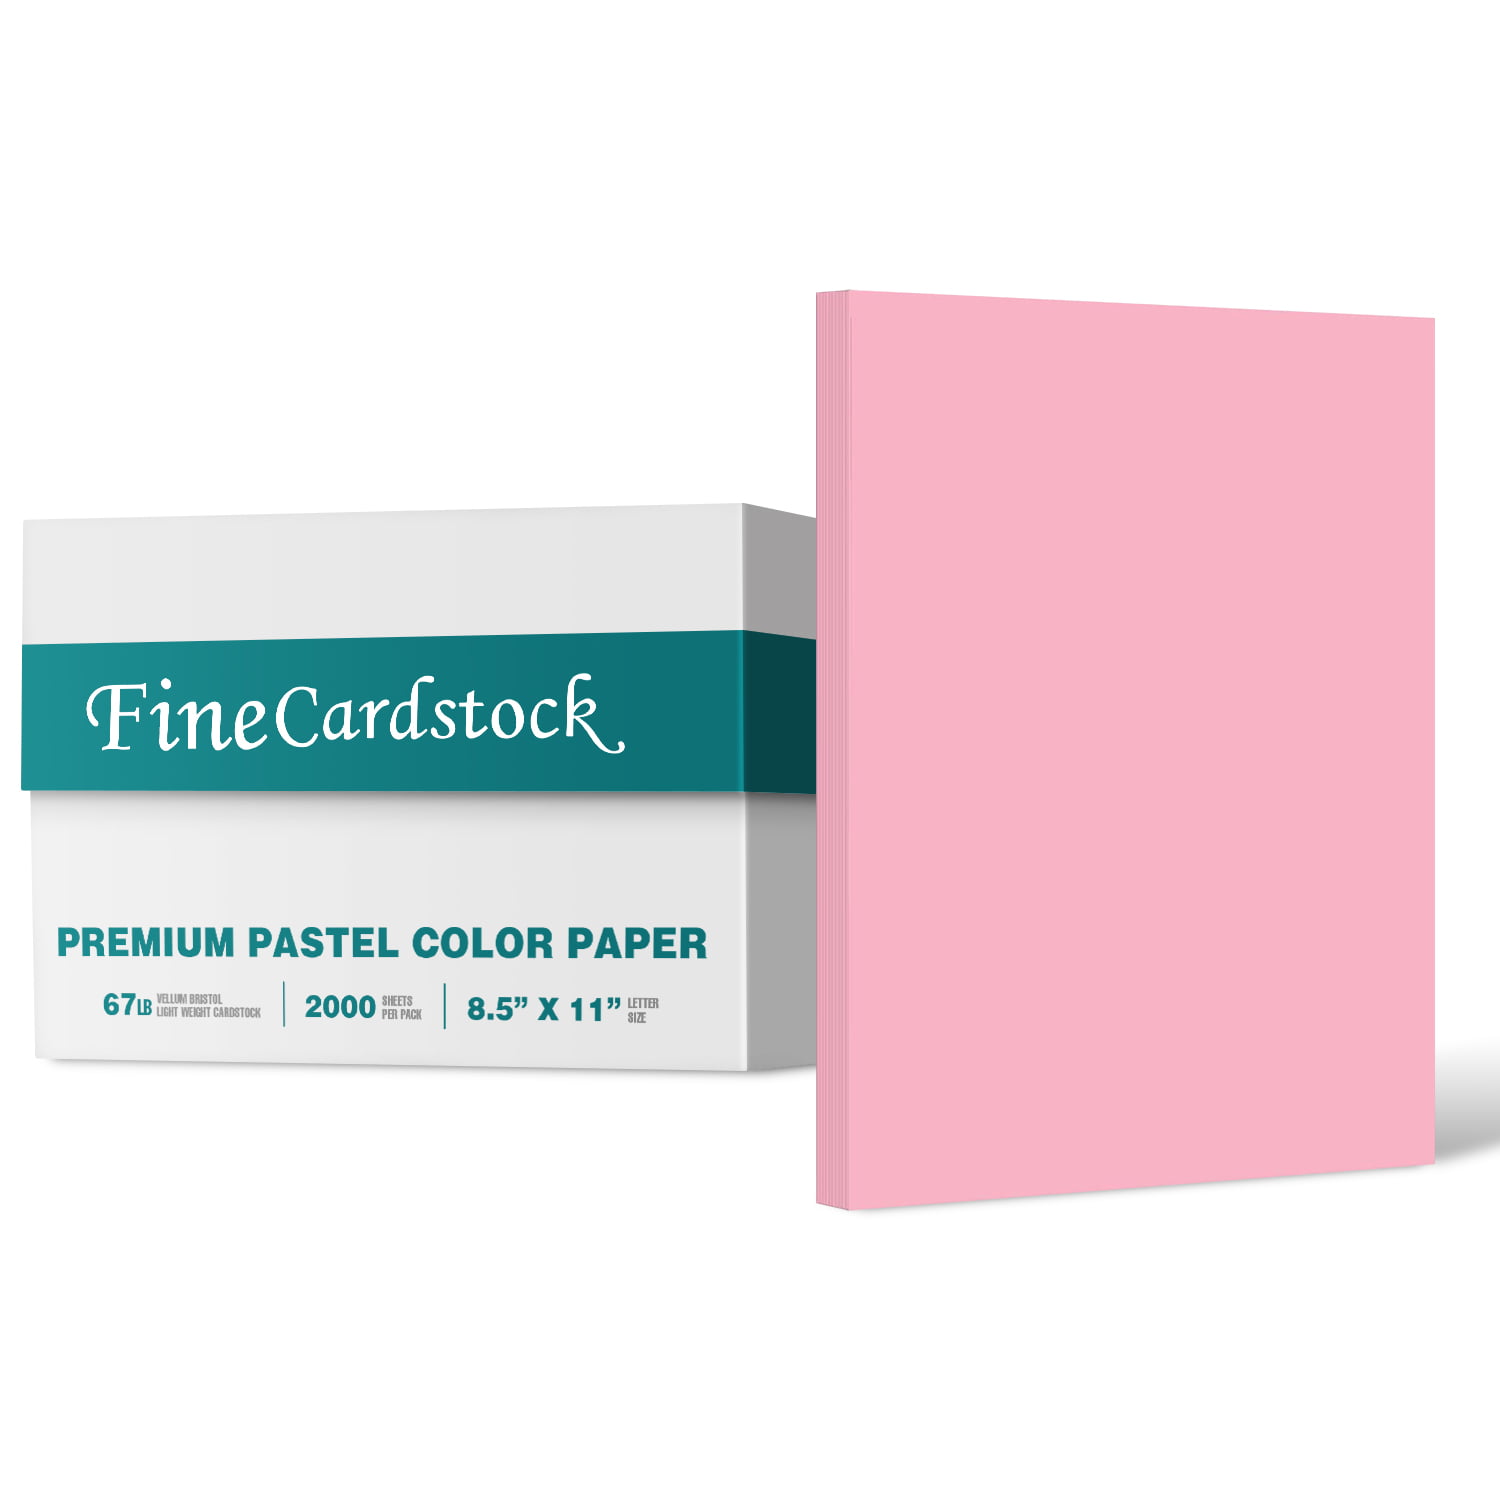 Perfect for School and Craft Projects 67Lb Vellum Bristol Cardstock Blue 8.5 x 14 Menu Legal Size Pastel Color Card Stock Paper Bulk of 1000 Sheets 